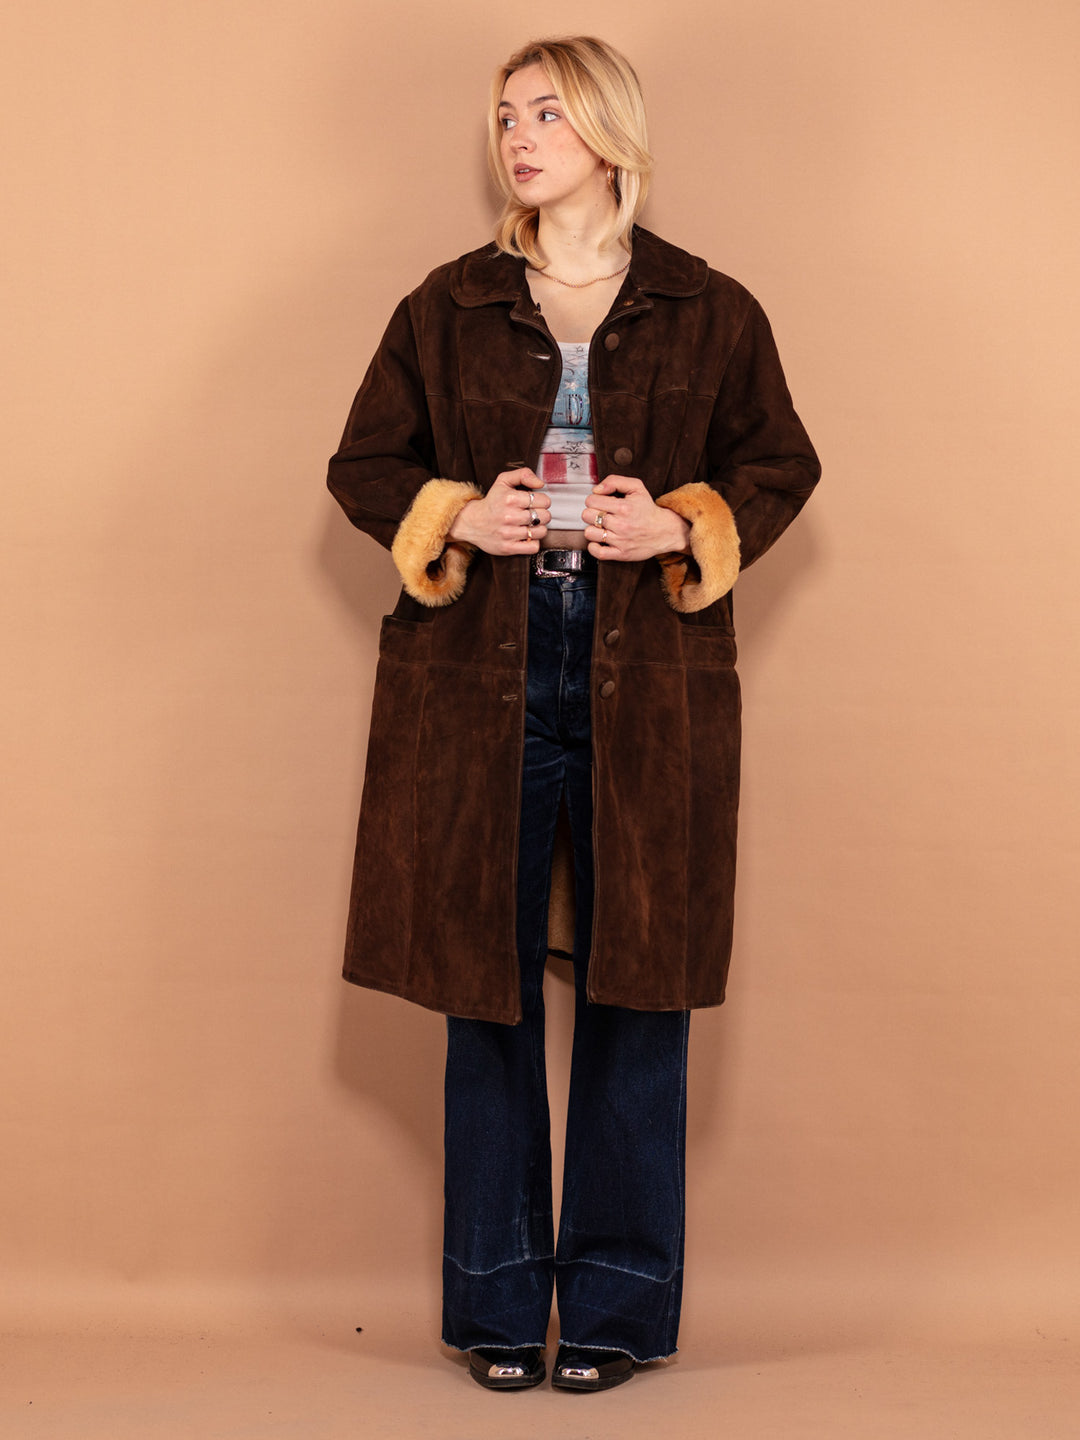 Heavy Sheepskin Coat 70's, Size XL, Western Suede Vintage Coat, Minimalist Shearling Overcoat, Cowgirl Winter Outerwear, Durable Thick Coat